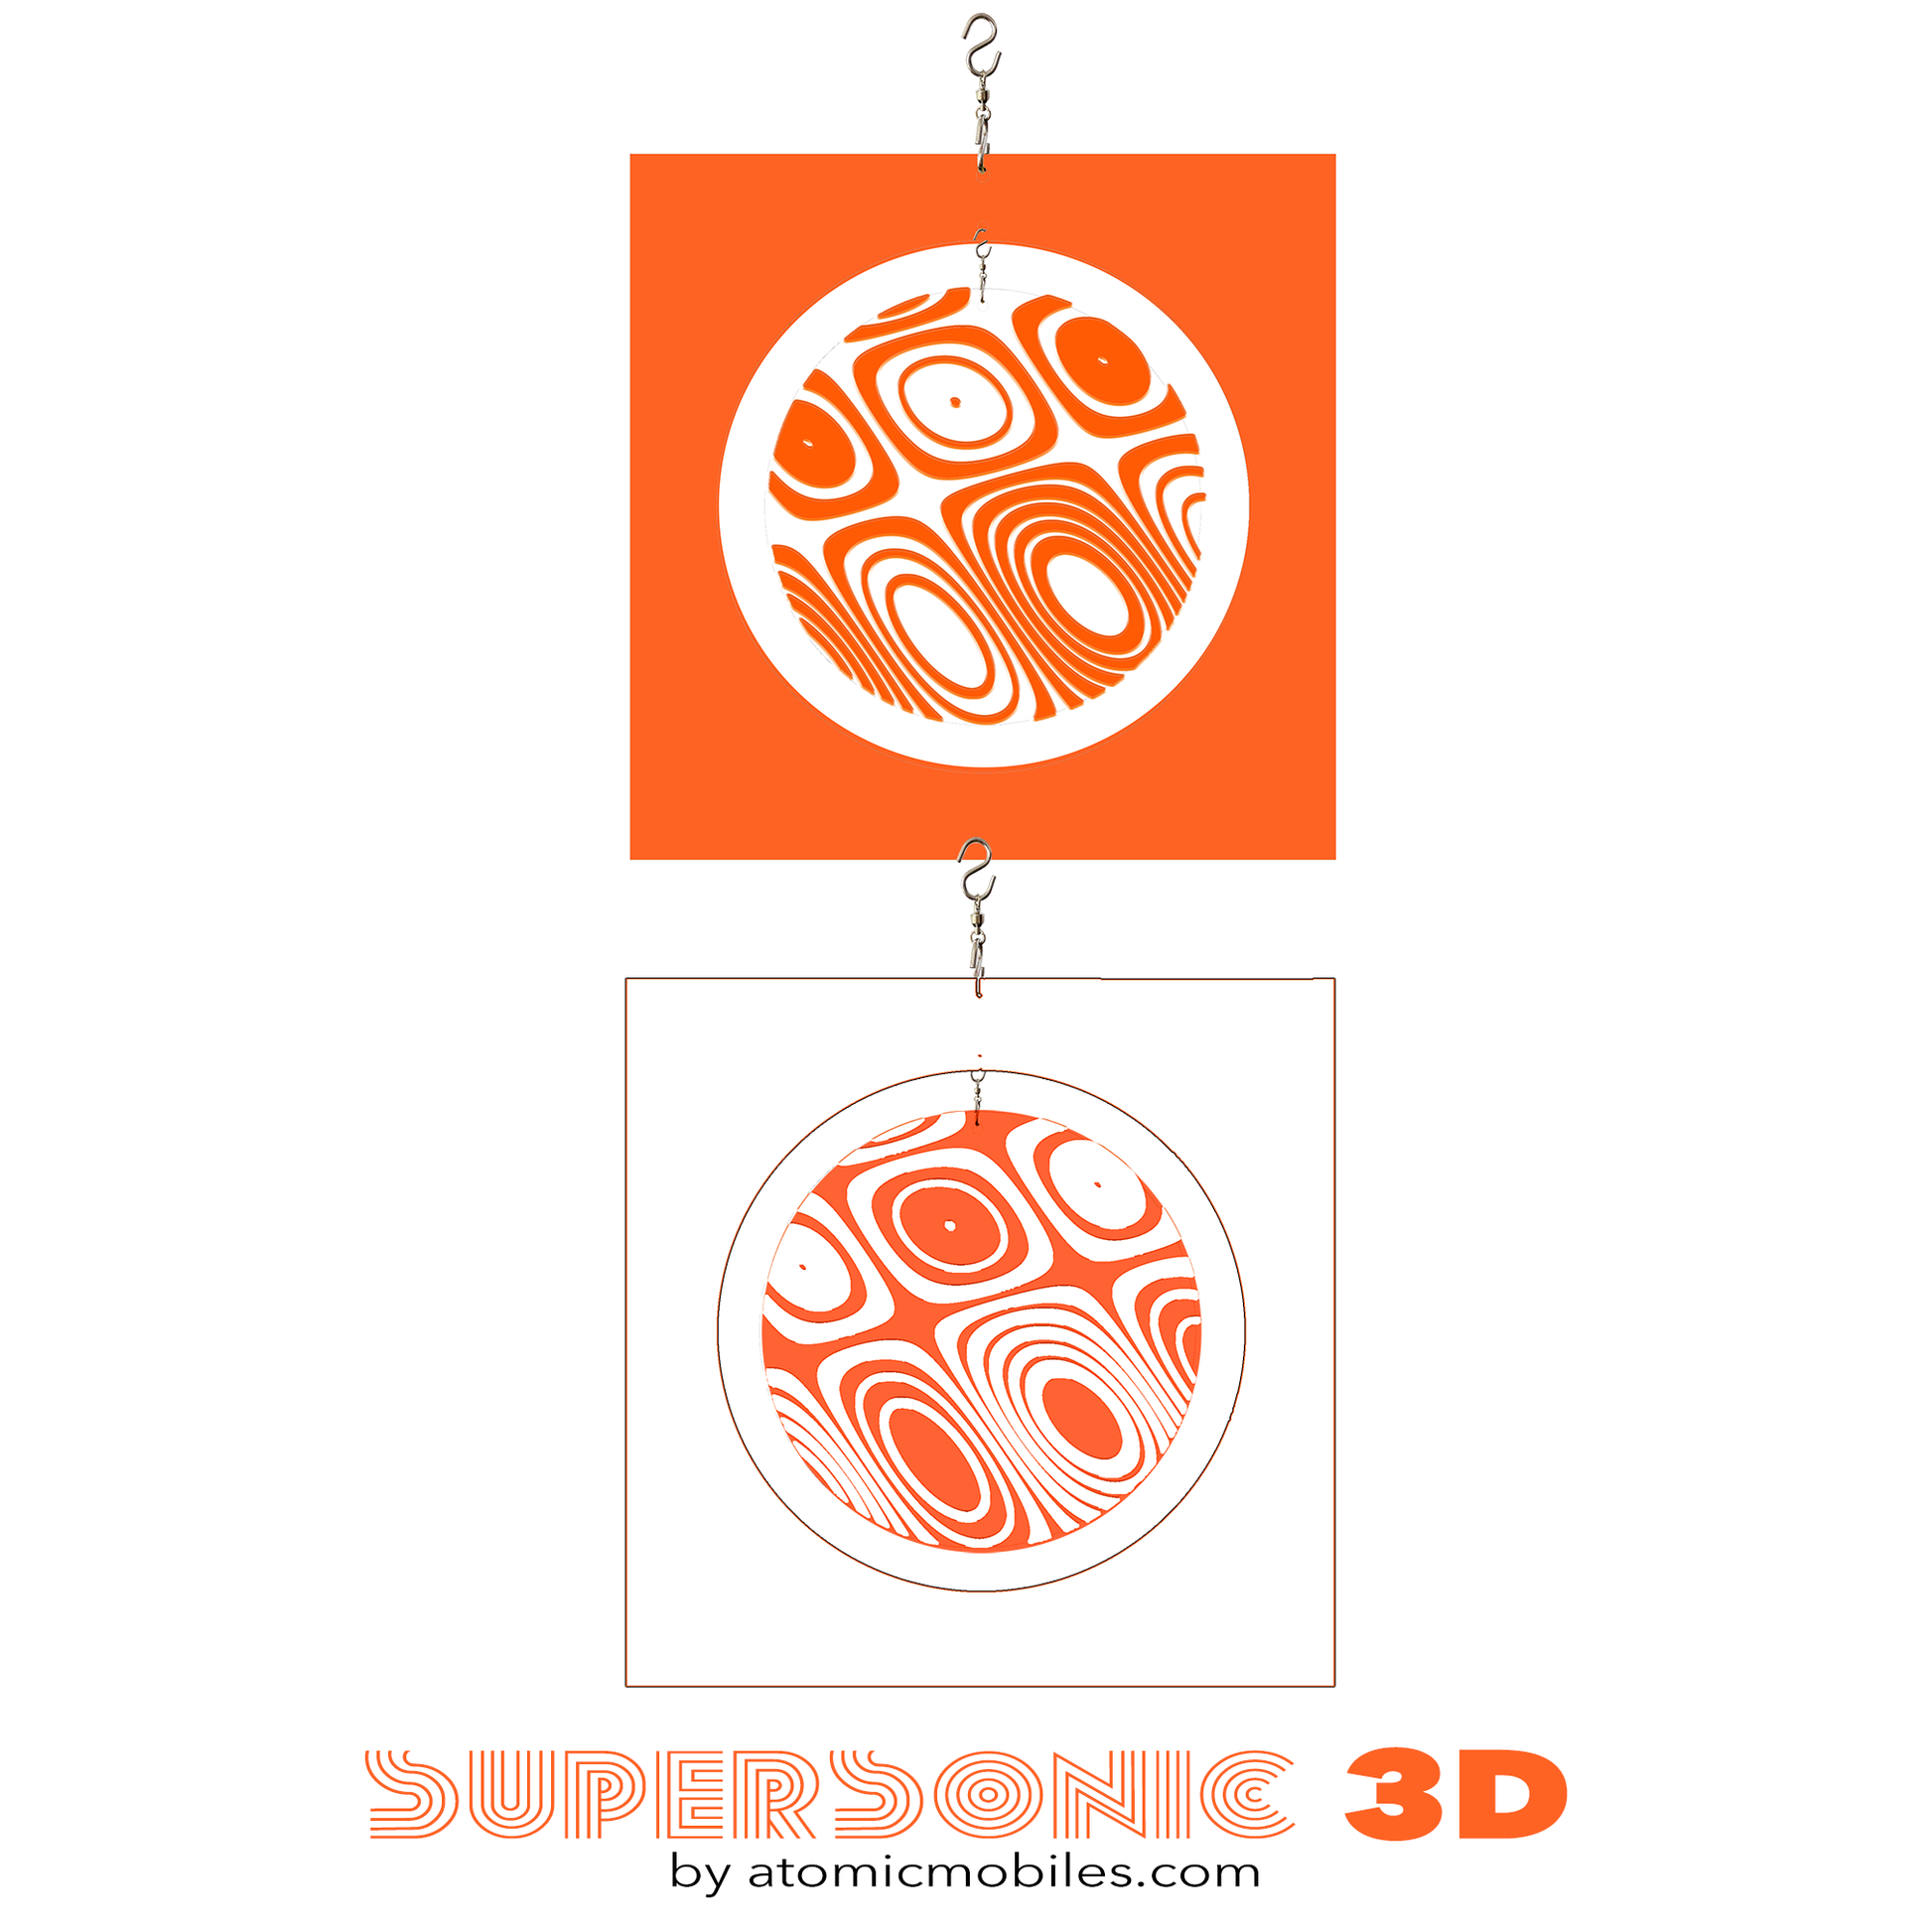 Both panels of Supersonic 3D kinetic art mobile in White and Orange - groovy retro geometric art made with acrylic plexiglass by AtomicMobiles.com